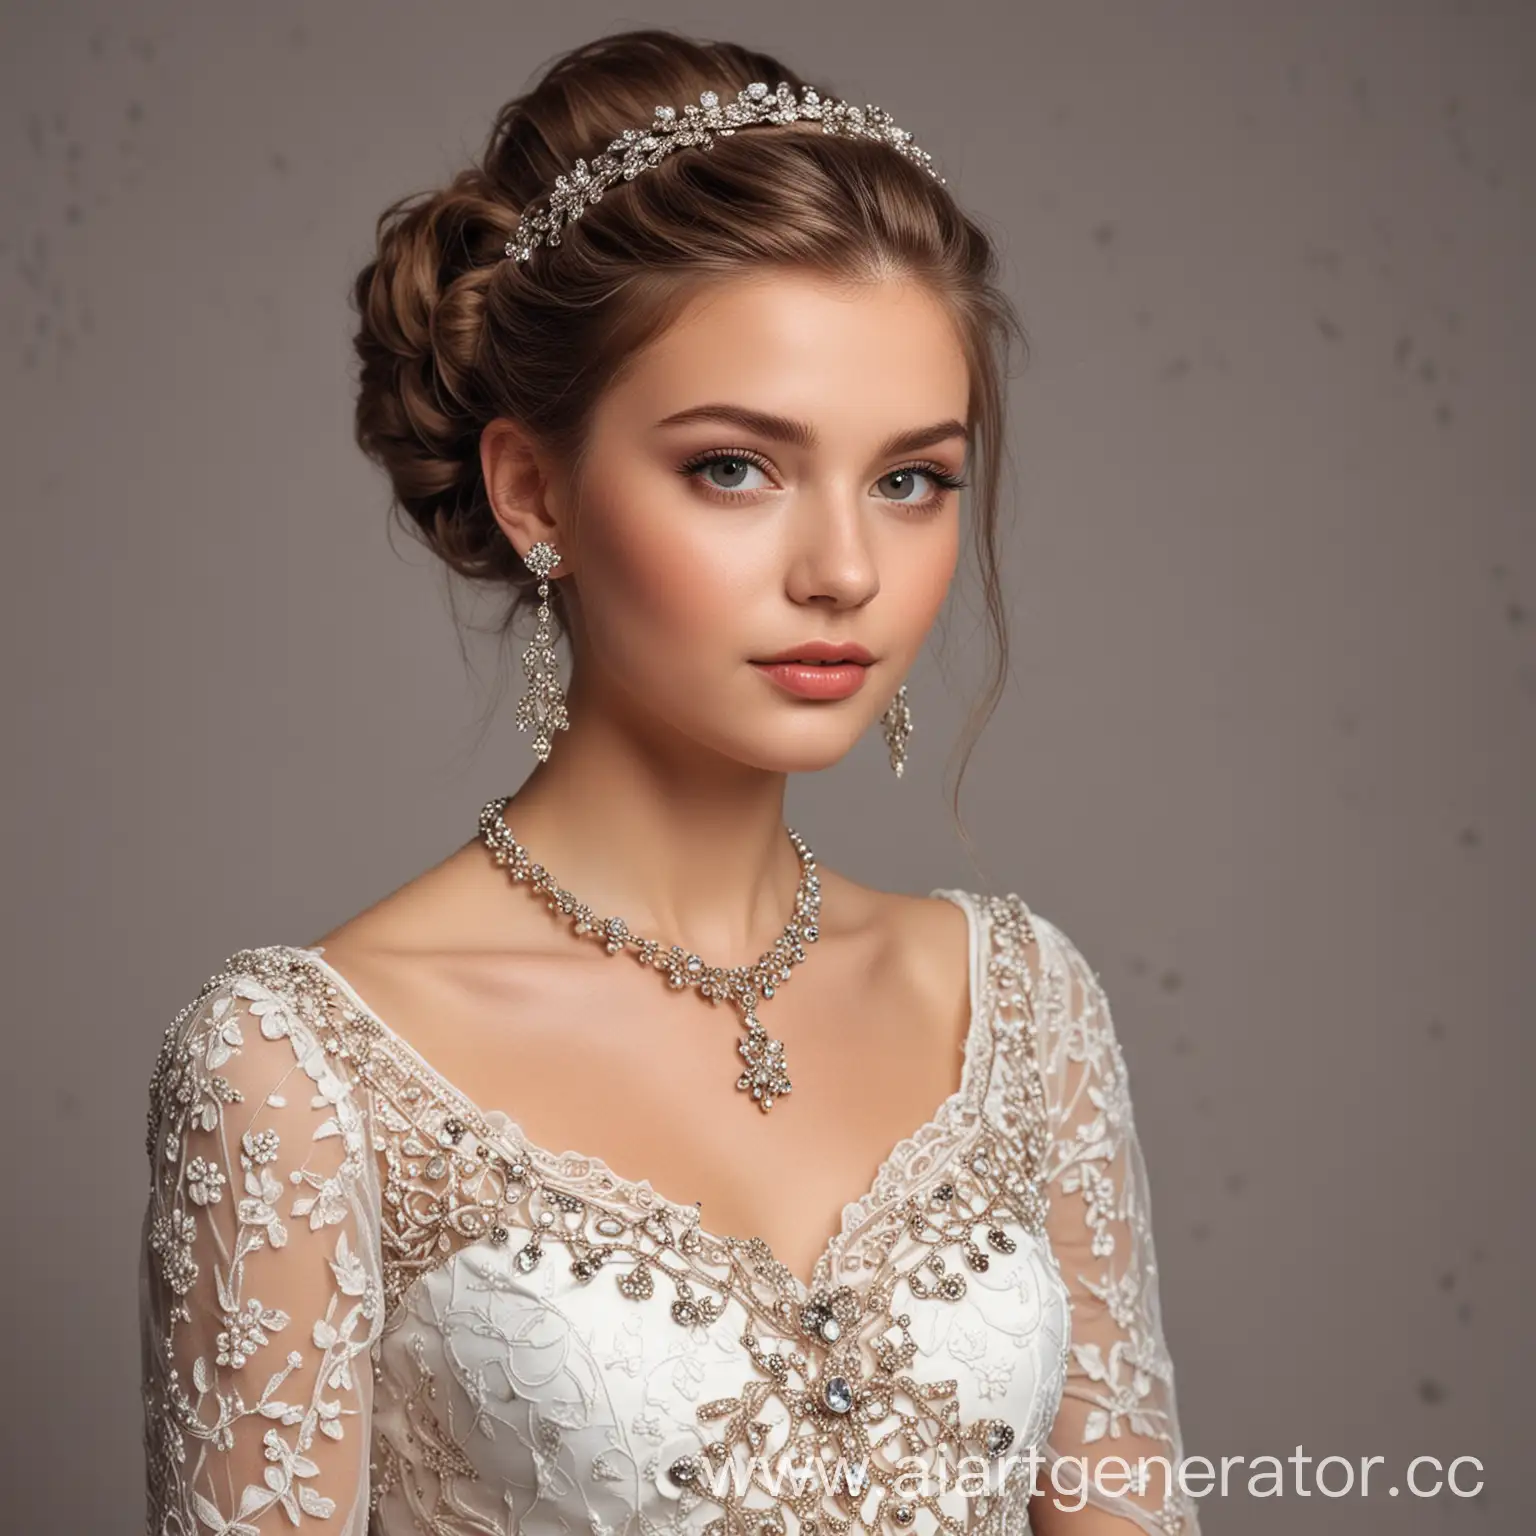 Elegant-Woman-Adorned-in-Exquisite-Jewelry-and-Luxurious-Attire